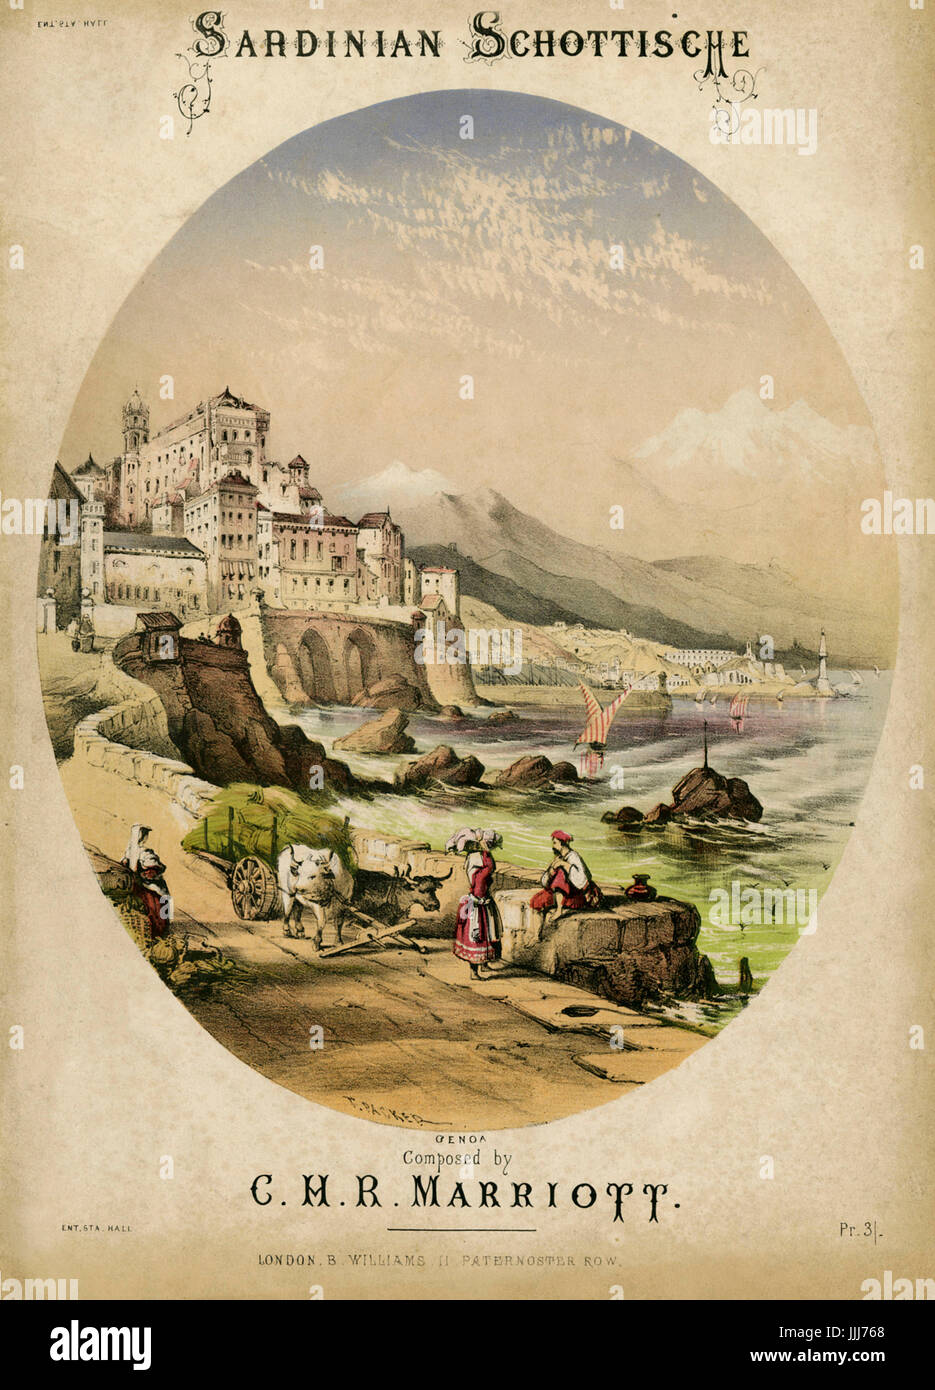 The Sardinian Schottische by C. H. R. Marriott, score cover, 1857, after an illustration by T. Packer. Pastoral scene depicting Genoa at the foot of a castle, and fishing boats in the Mediterranean. Stock Photo